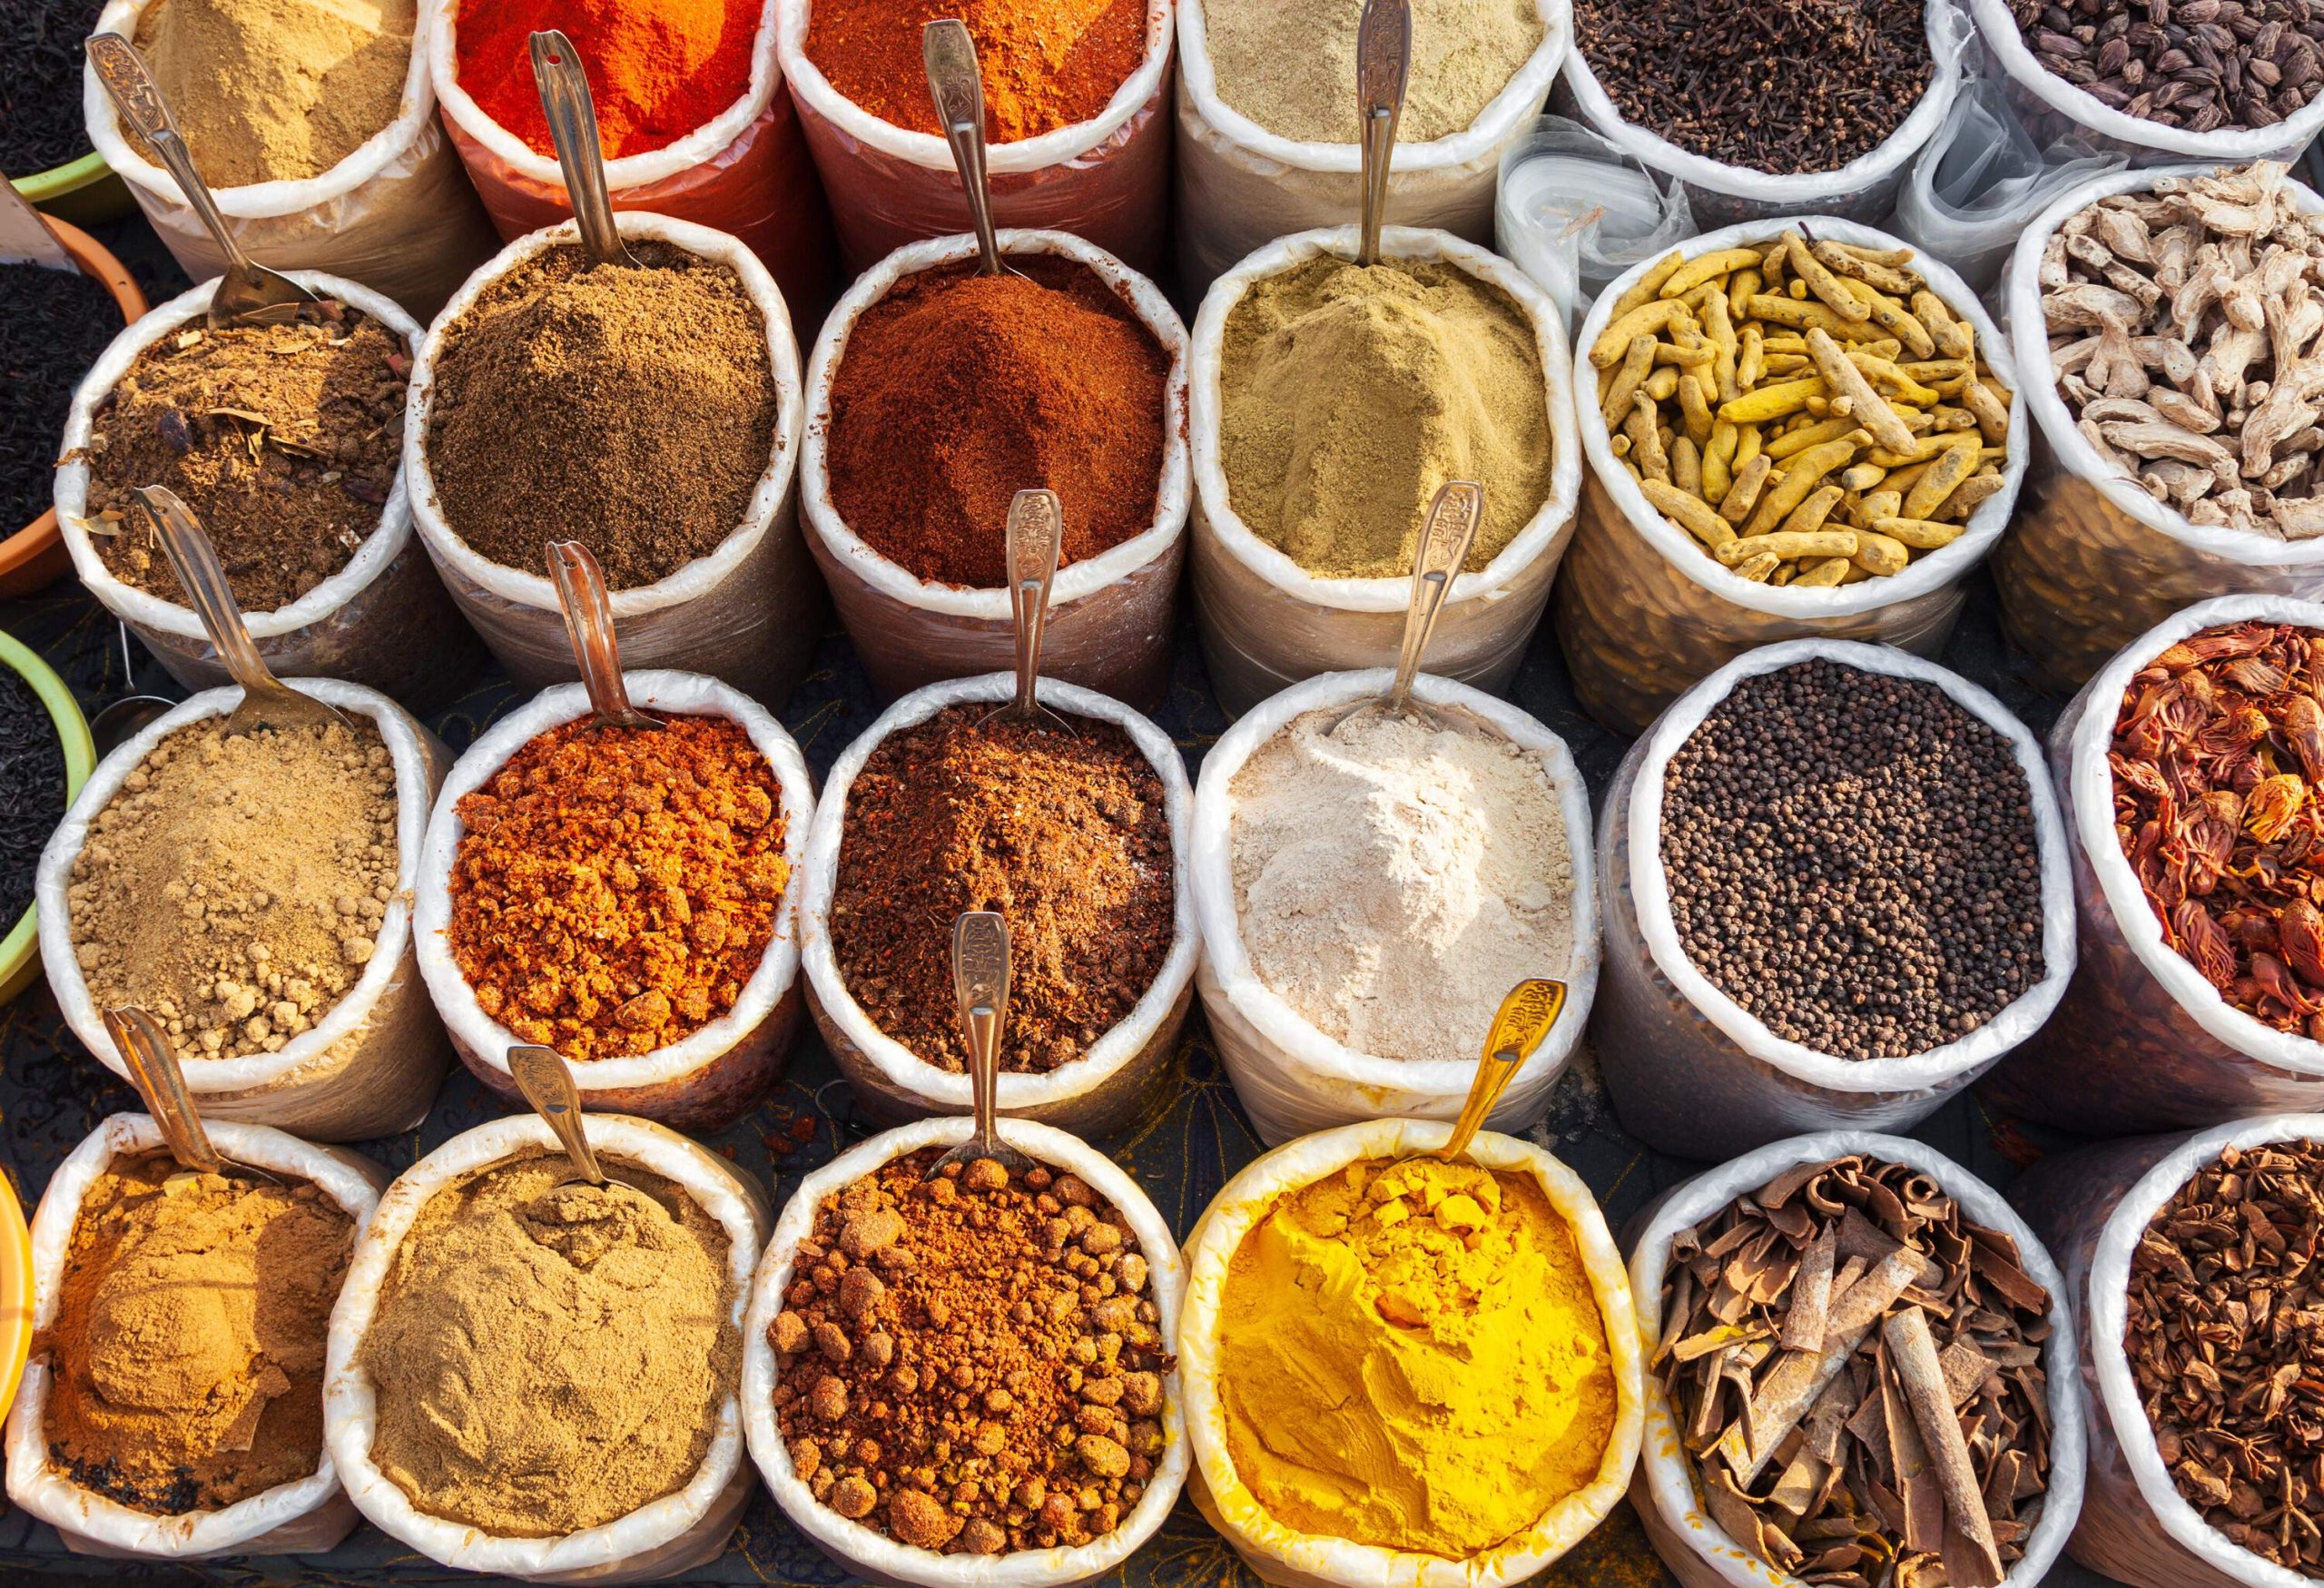 A retail display of colourful dried herbs and spices.